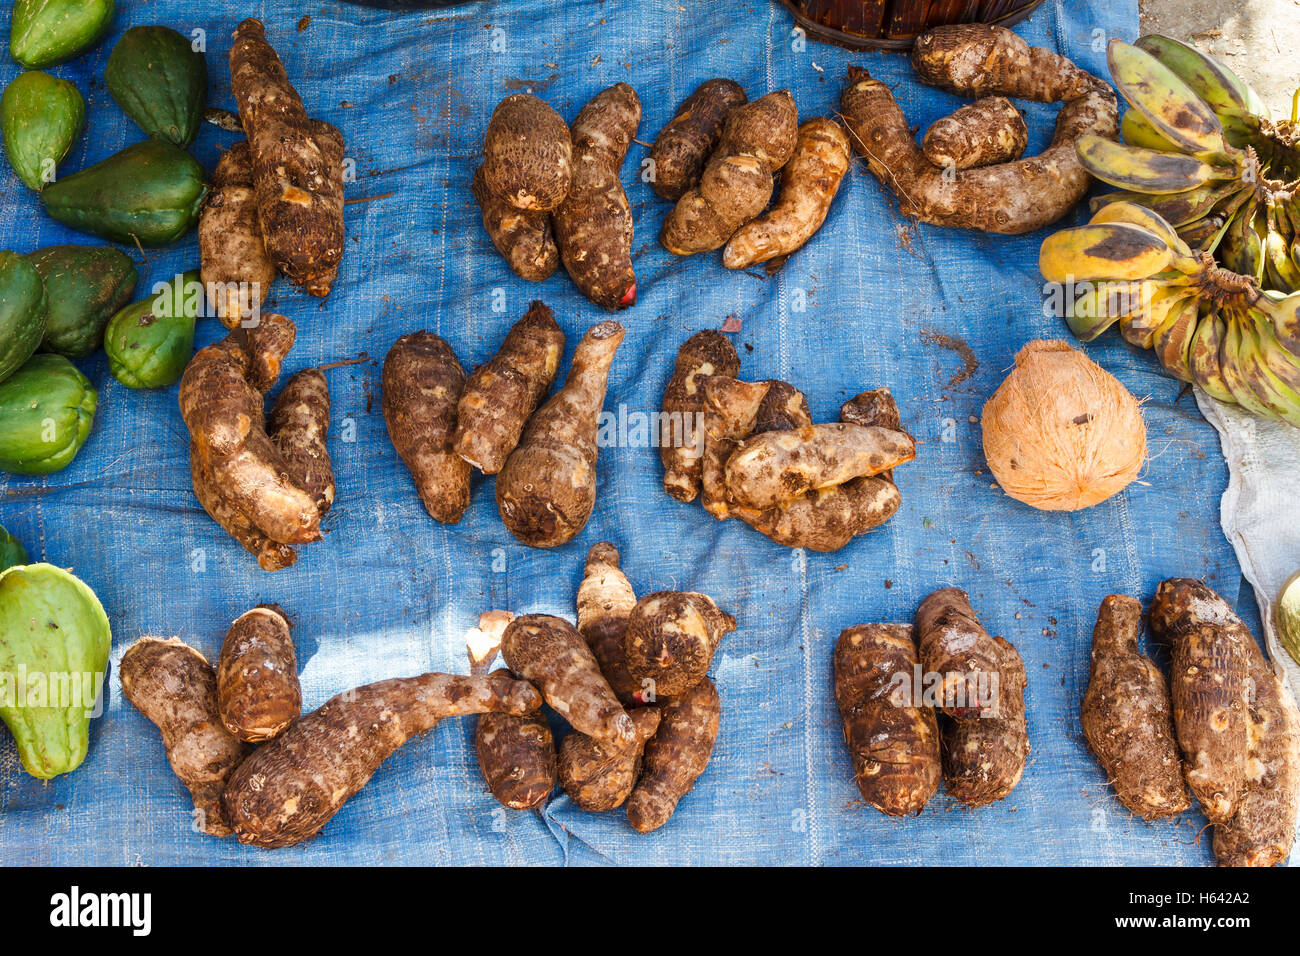 Cassava roots in a market. Stock Photo